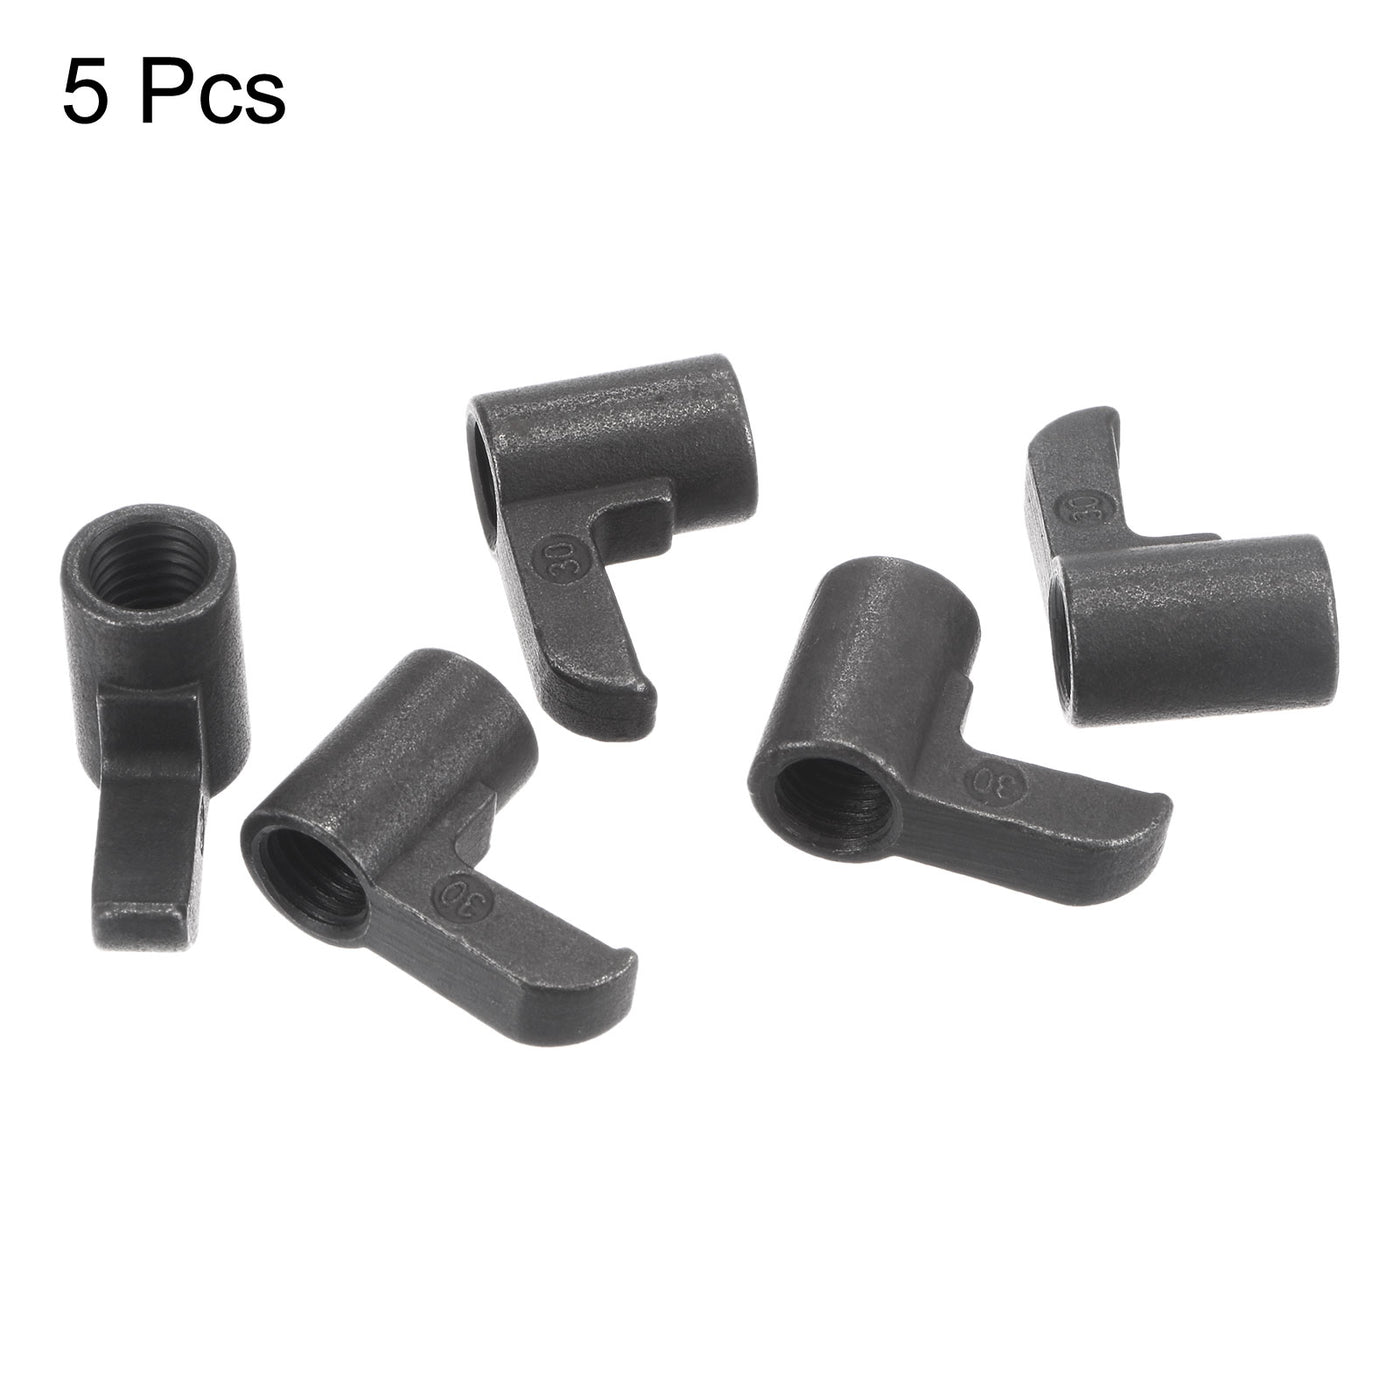 uxcell Uxcell CL-30 Inserts Plate Finger Clamp for CNC Lathe Turning Tool, 5Pcs